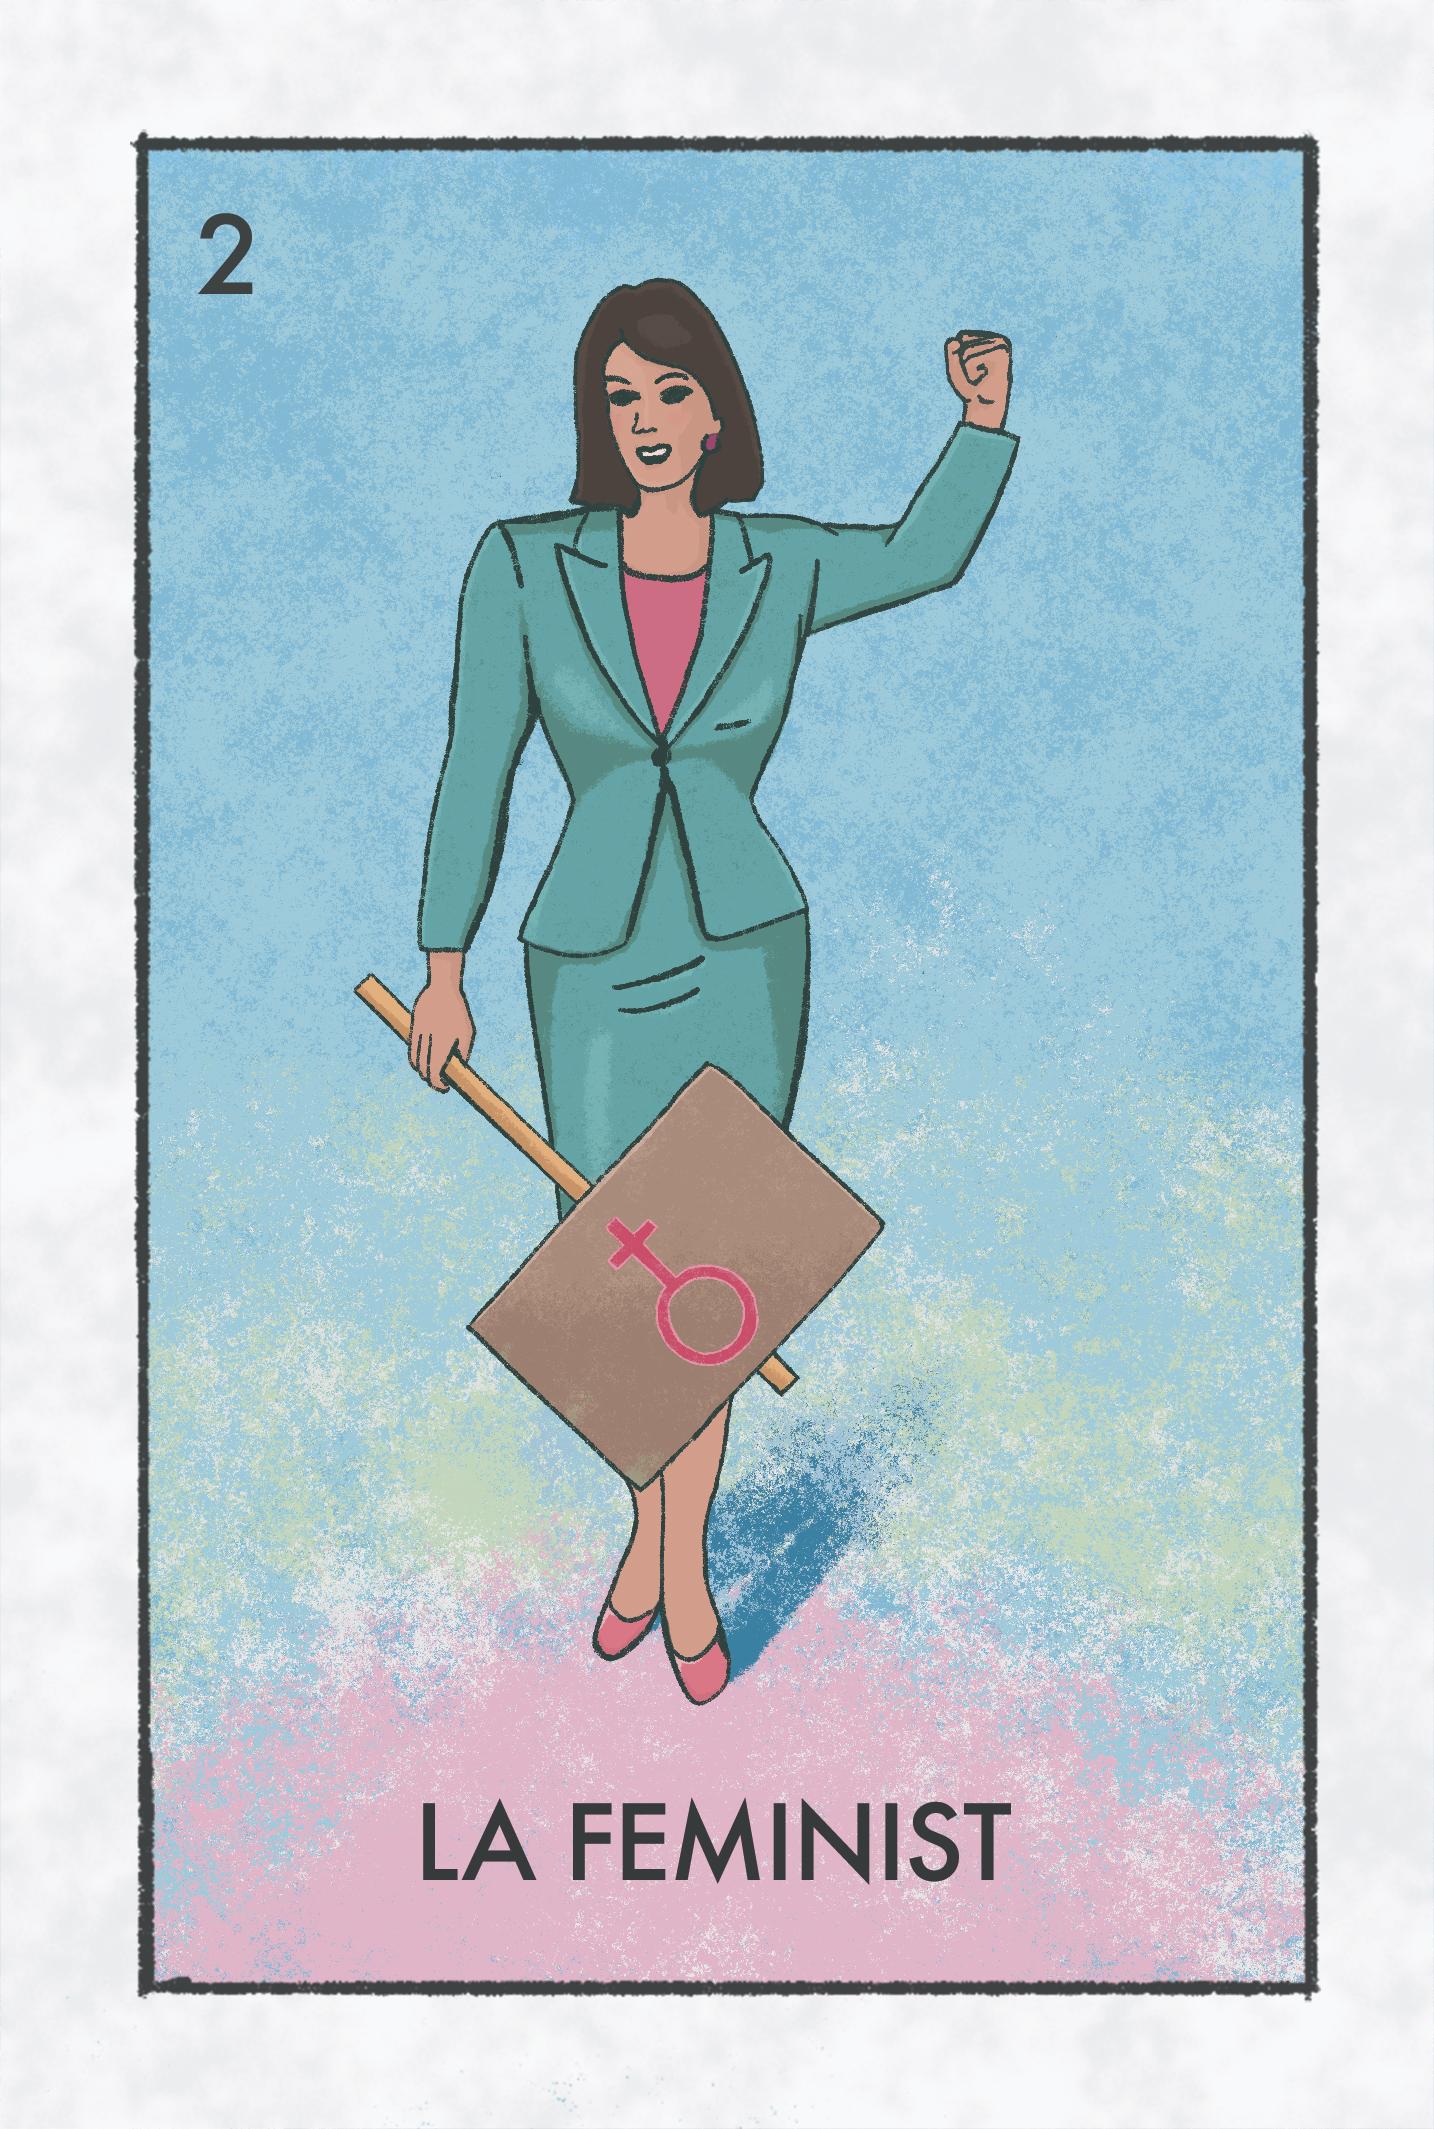 An illustrated card depicting a woman carrying a protest sign with the text 